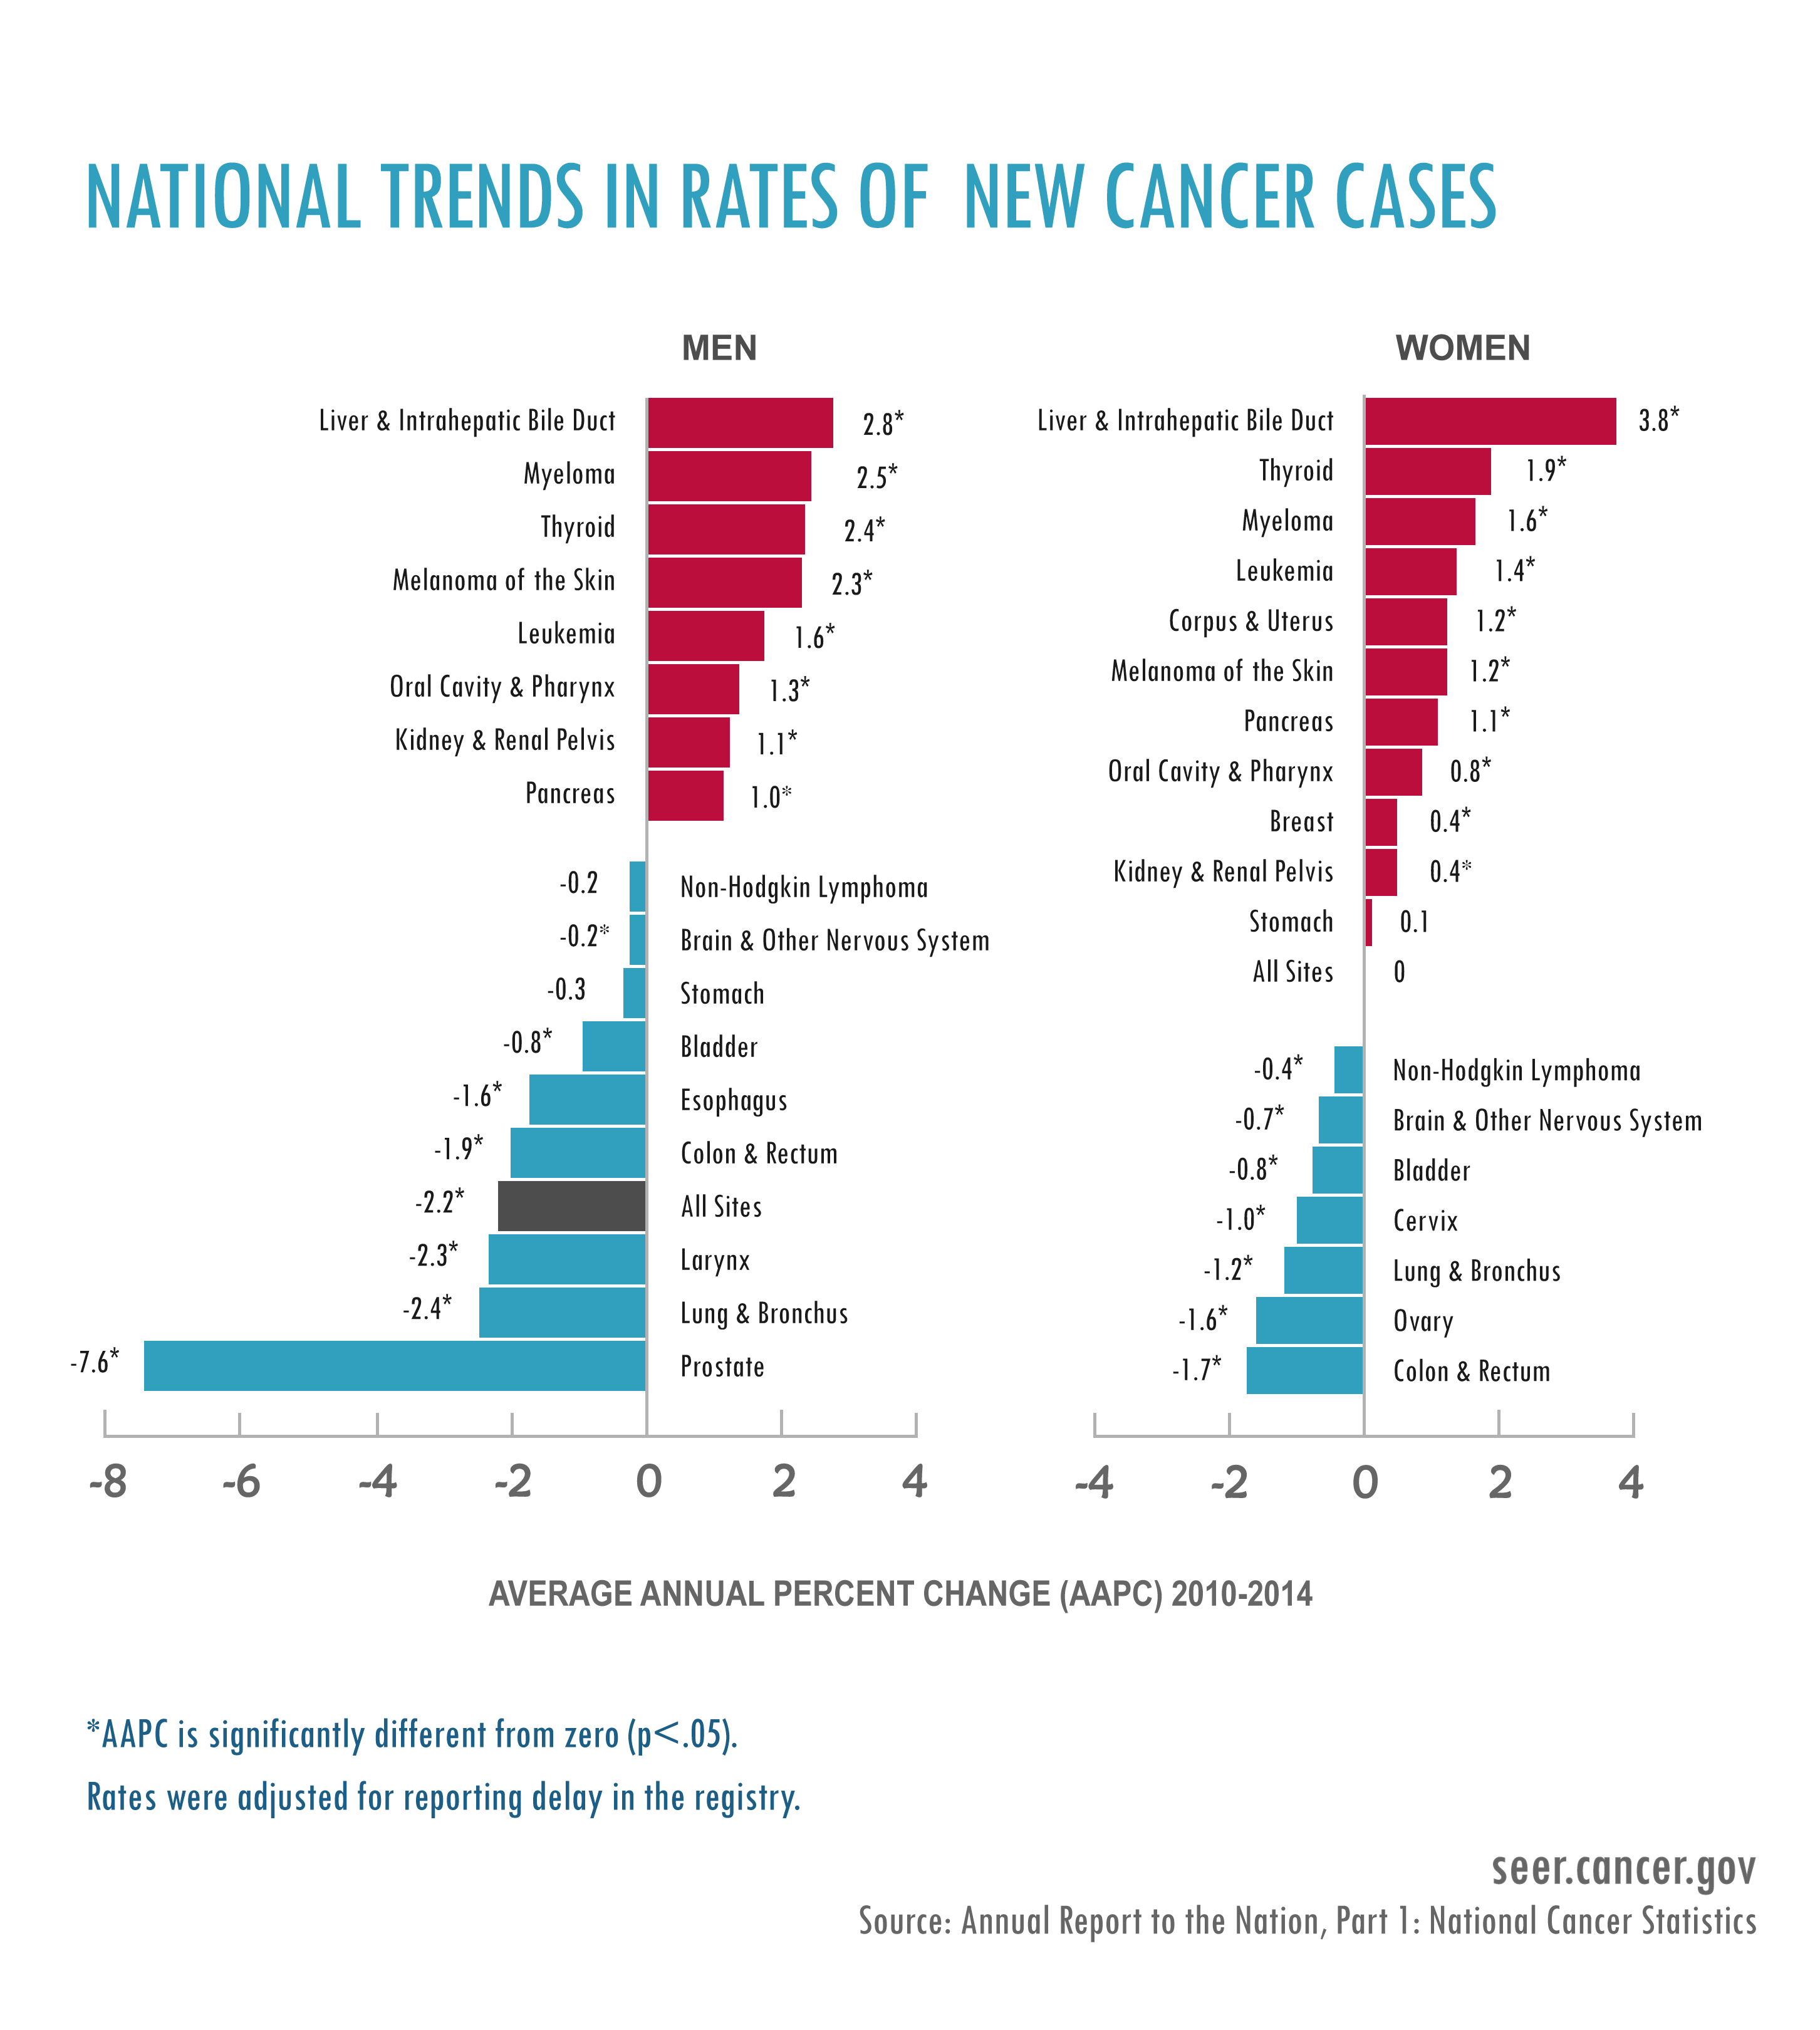 Between 2010 and 2014, nine of the 17 more common cancers in men showed decreases in incidence